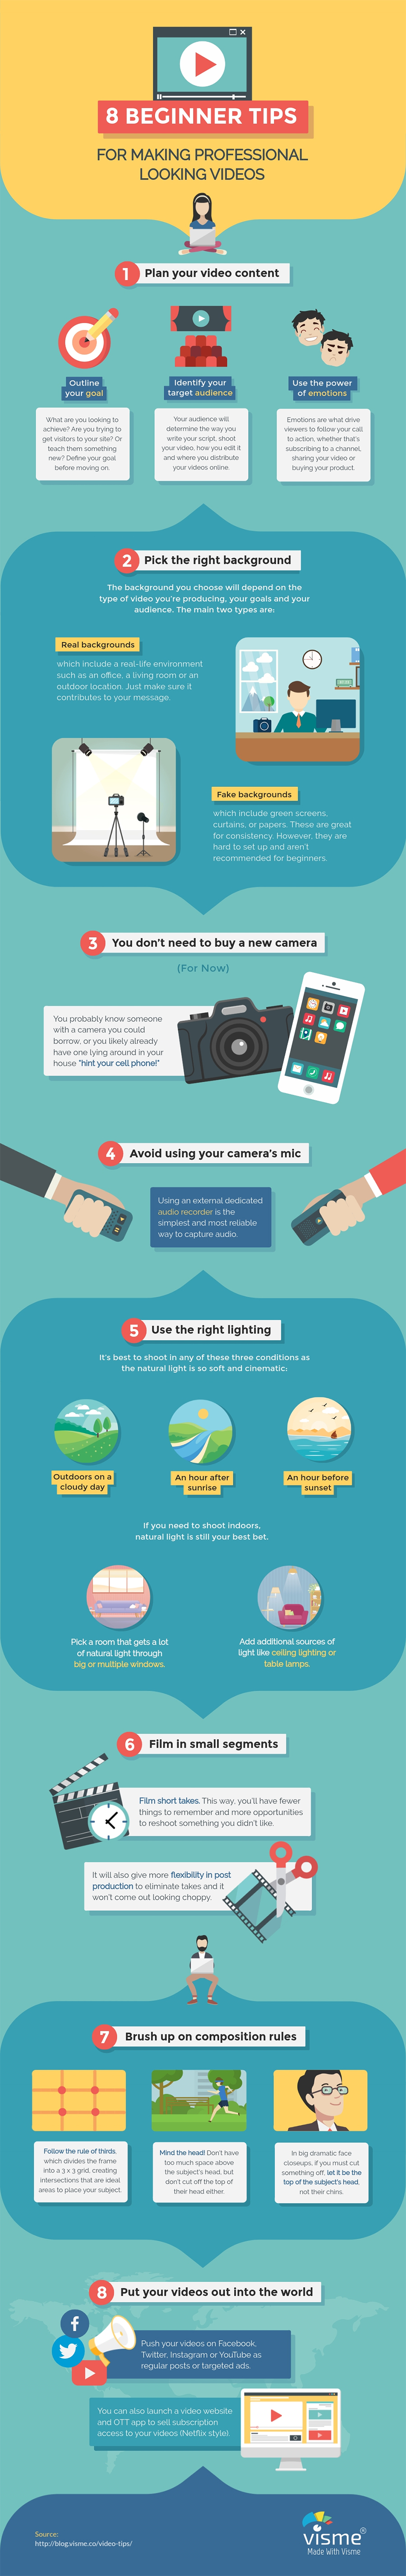 8 Step Guide To Creating Professional Video Content